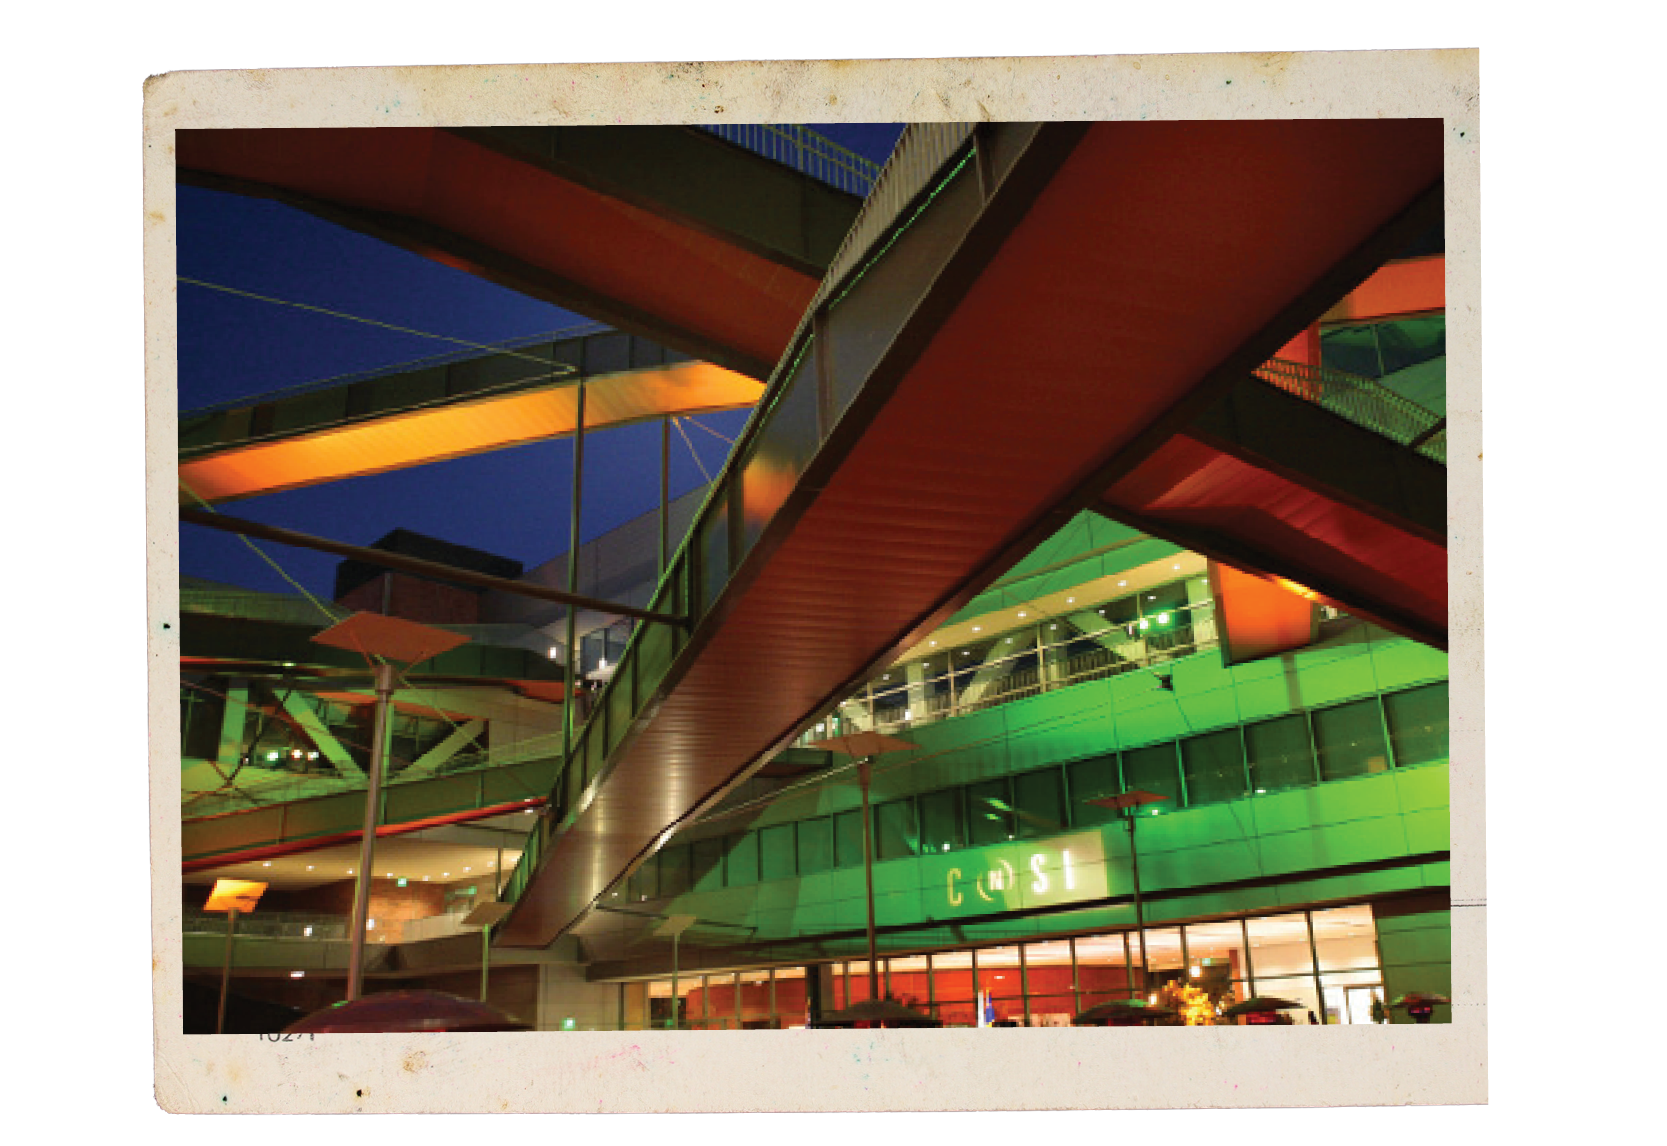 The California NanoSystems Institute illuminated by green and orange lights, a dark-blue night sky in the background.